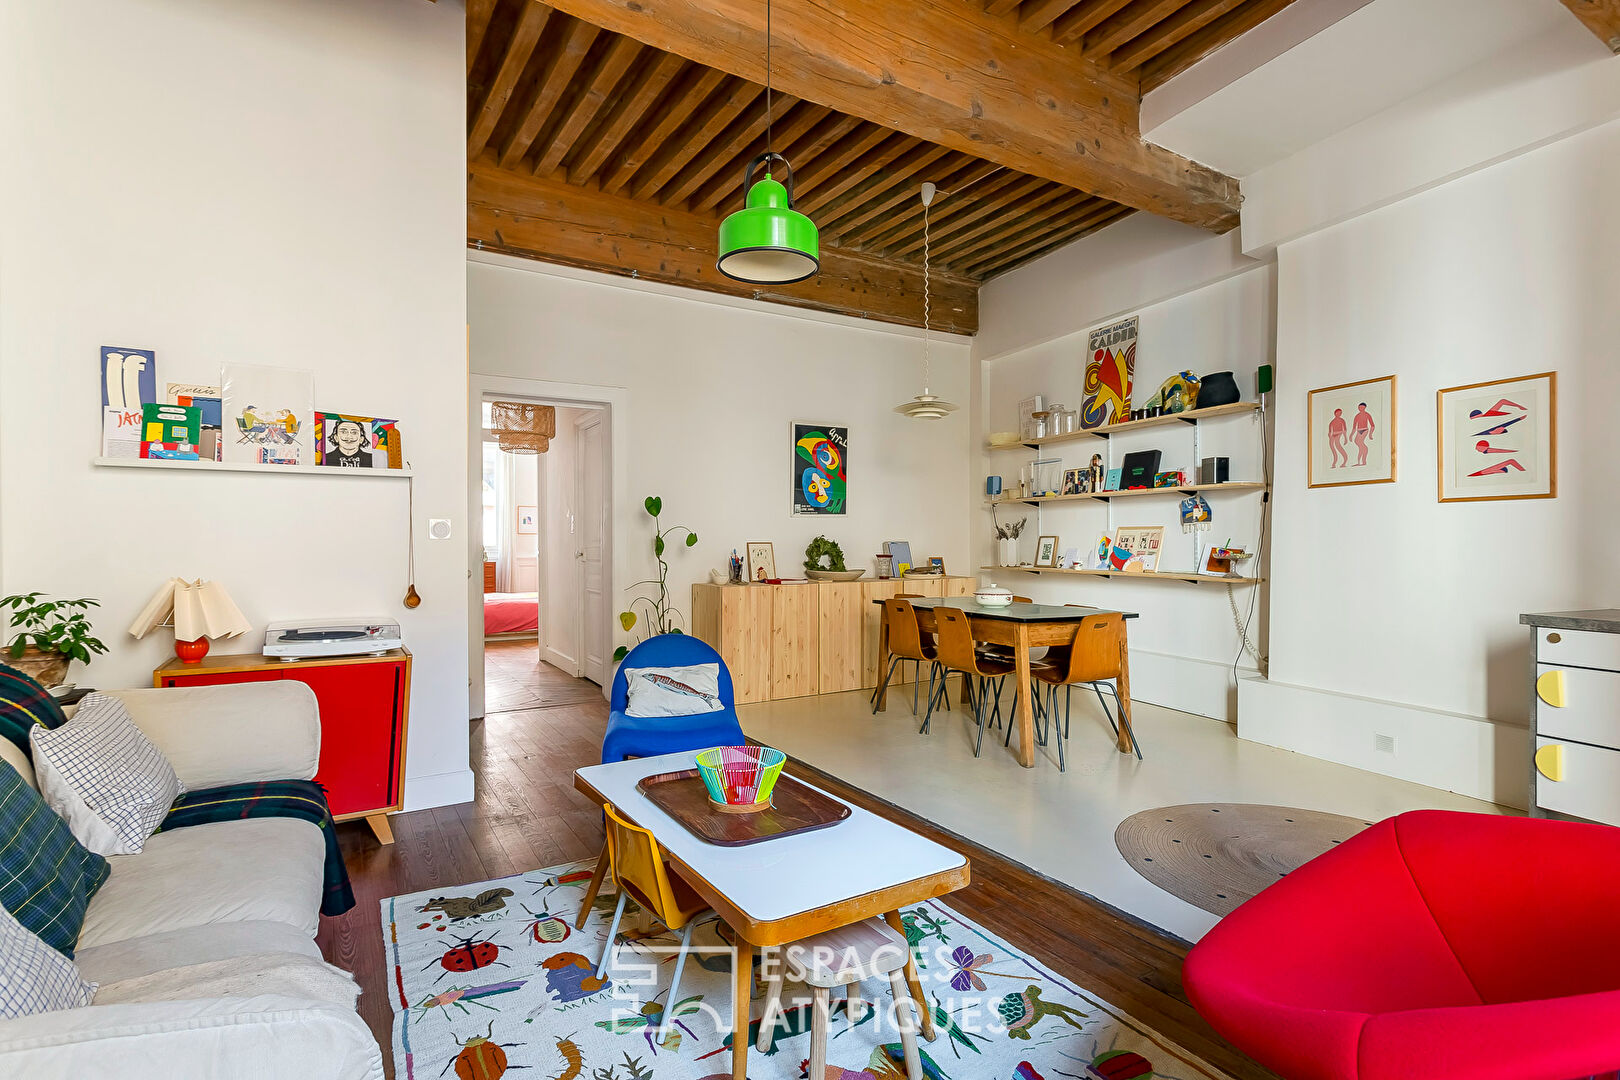 Renovated character apartment in the very center